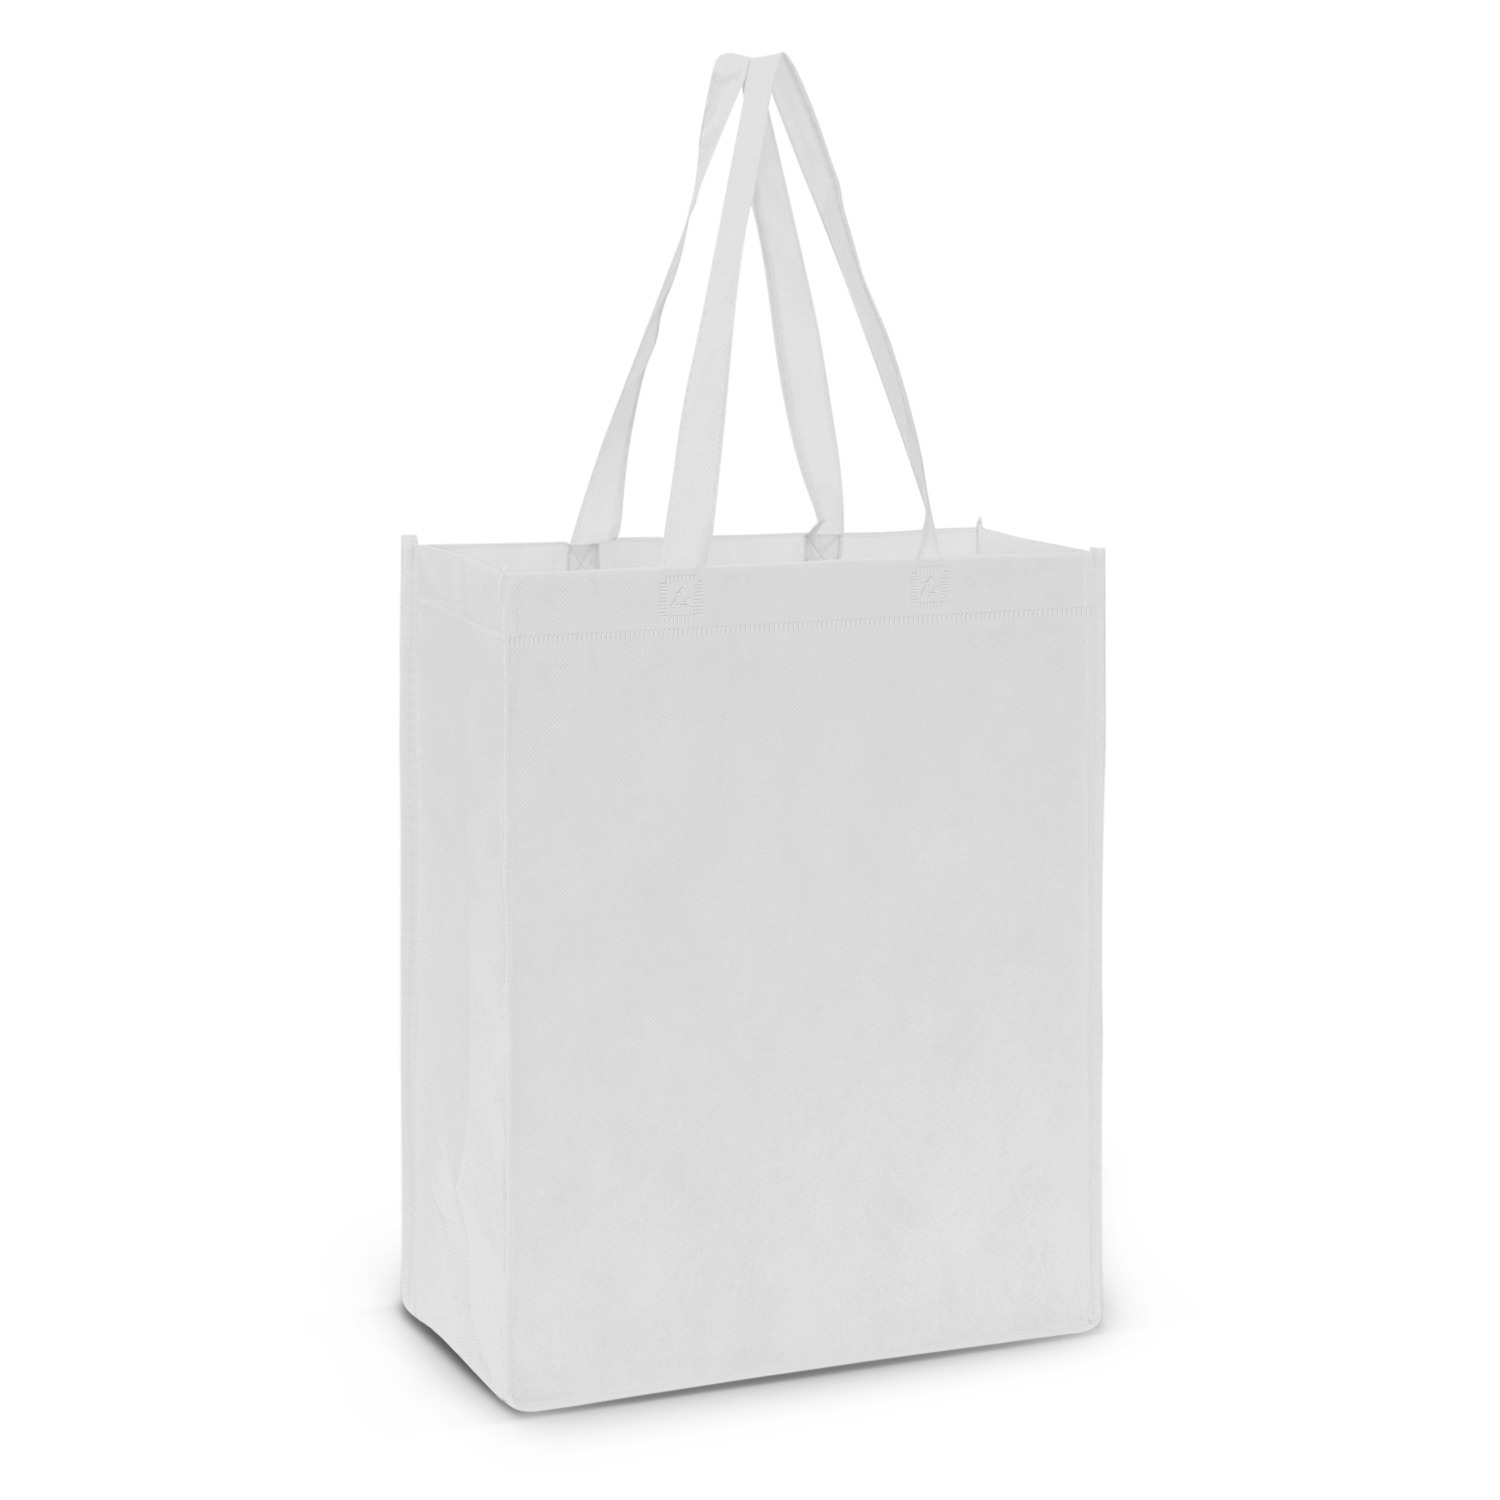 EP Range A3 Tote Bag with Full Colour Digital Print and Rush Production a3 bag